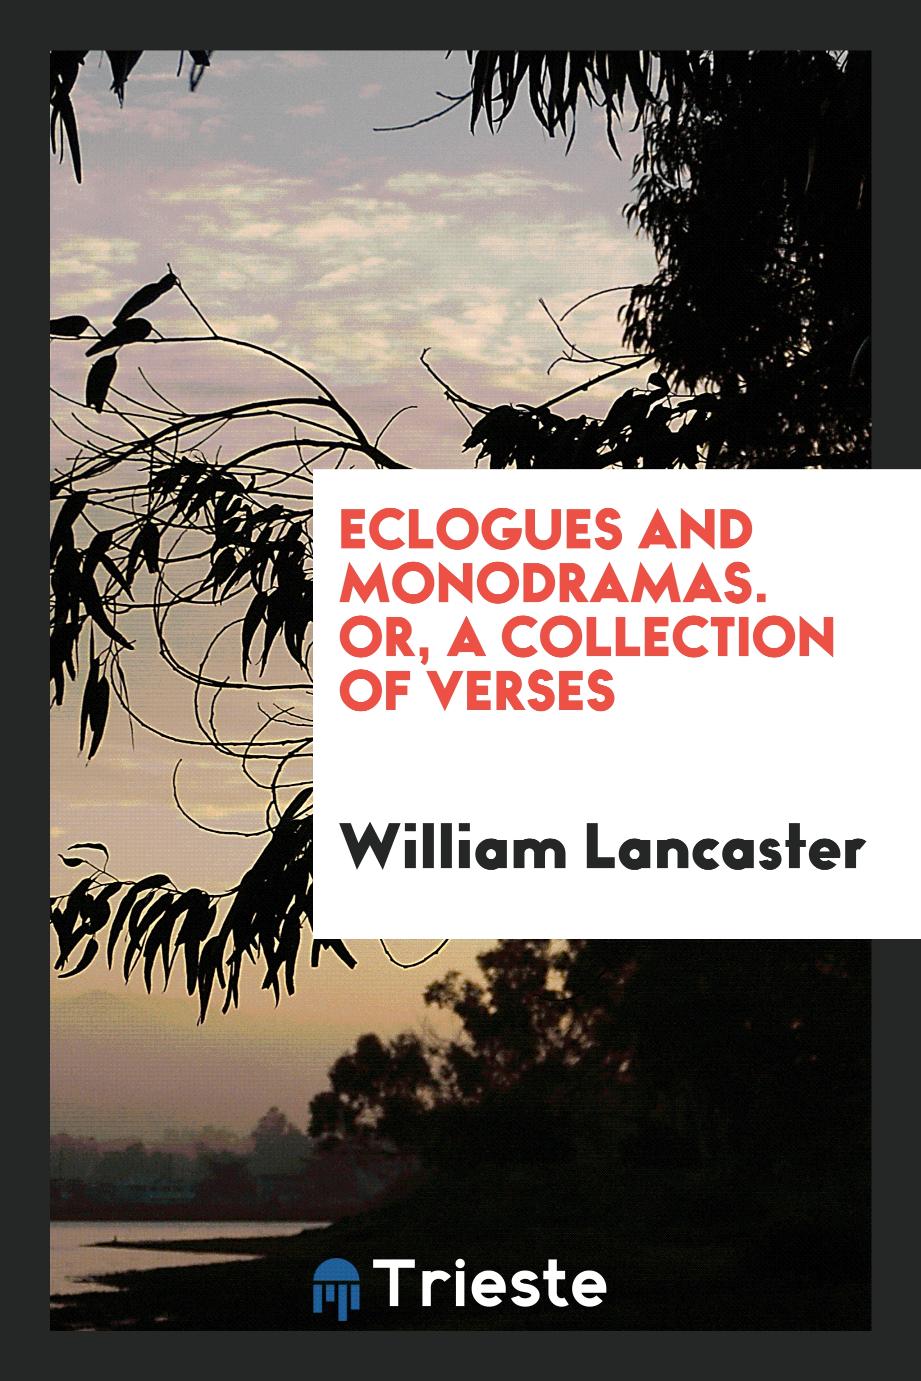 Eclogues and Monodramas. Or, A Collection of Verses